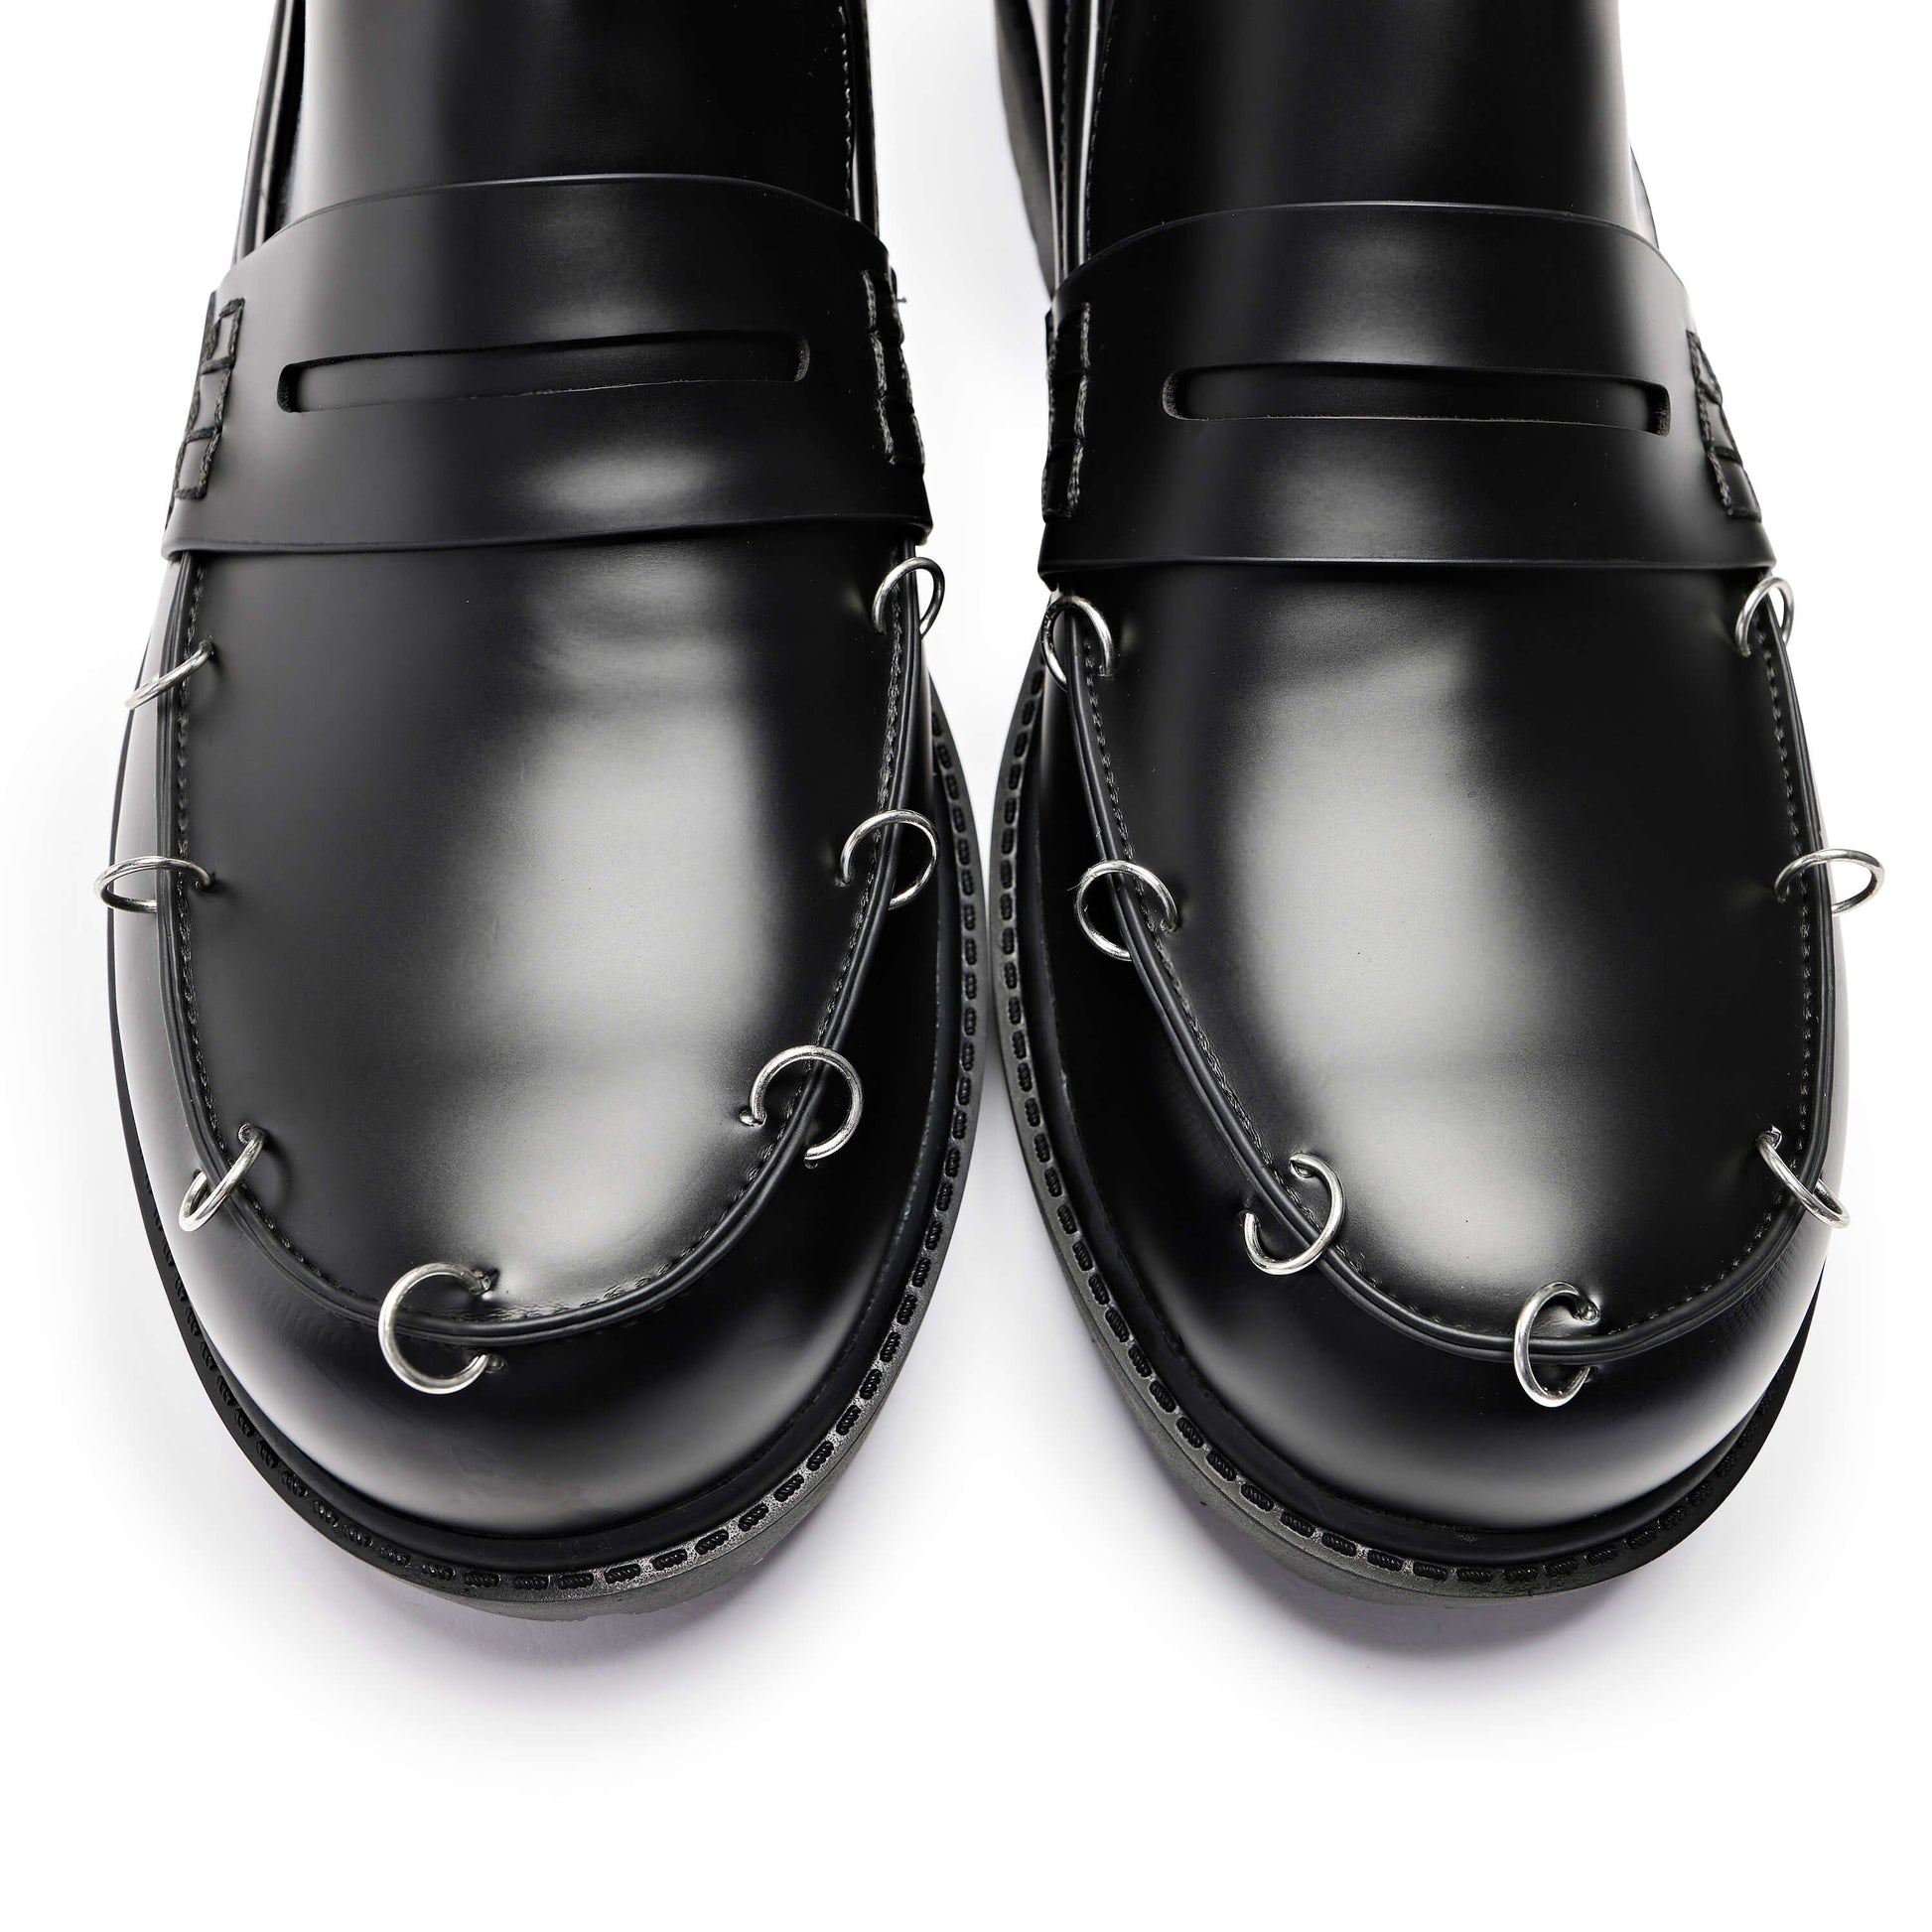 The Kaiden Pierced Men's Loafers - Shoes - KOI Footwear - Black - Top View